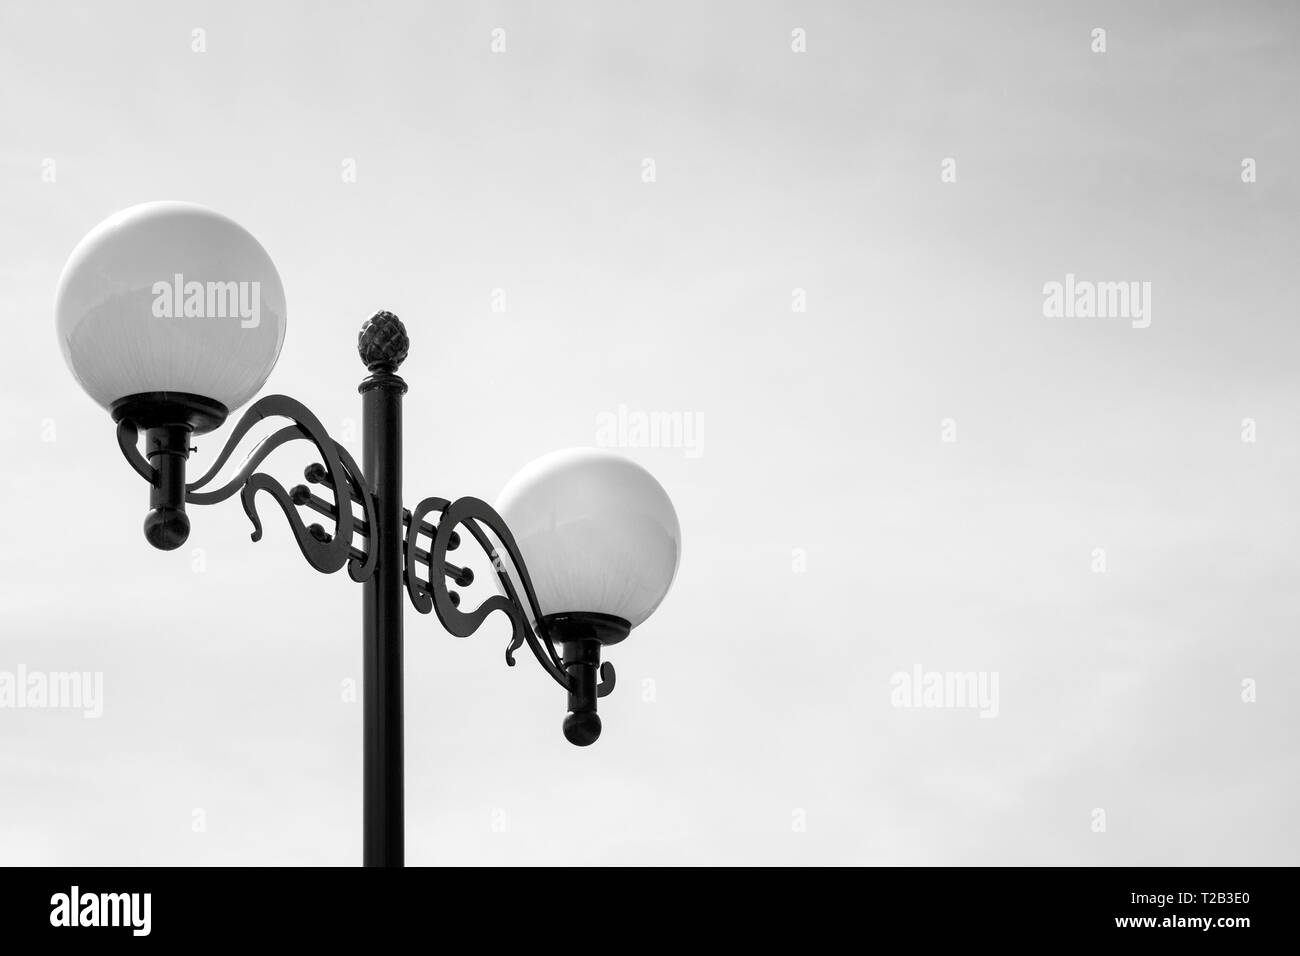 Round street lamps Black and White Stock Photos & Images - Alamy